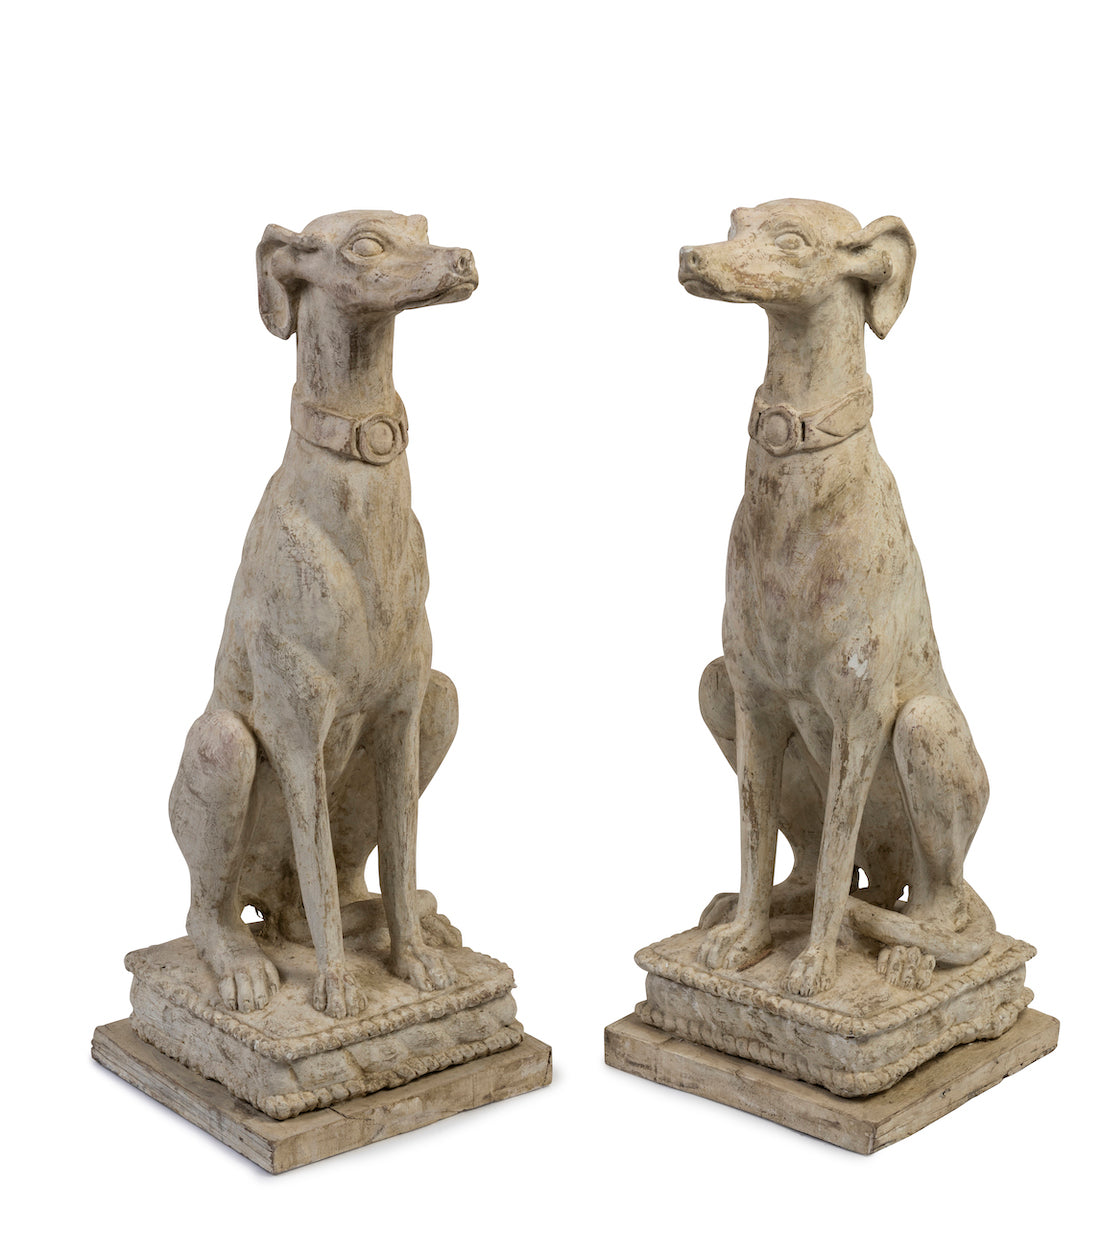 SOLD An imposing pair of large white-painted terracotta greyhounds, Italian early 20th Century